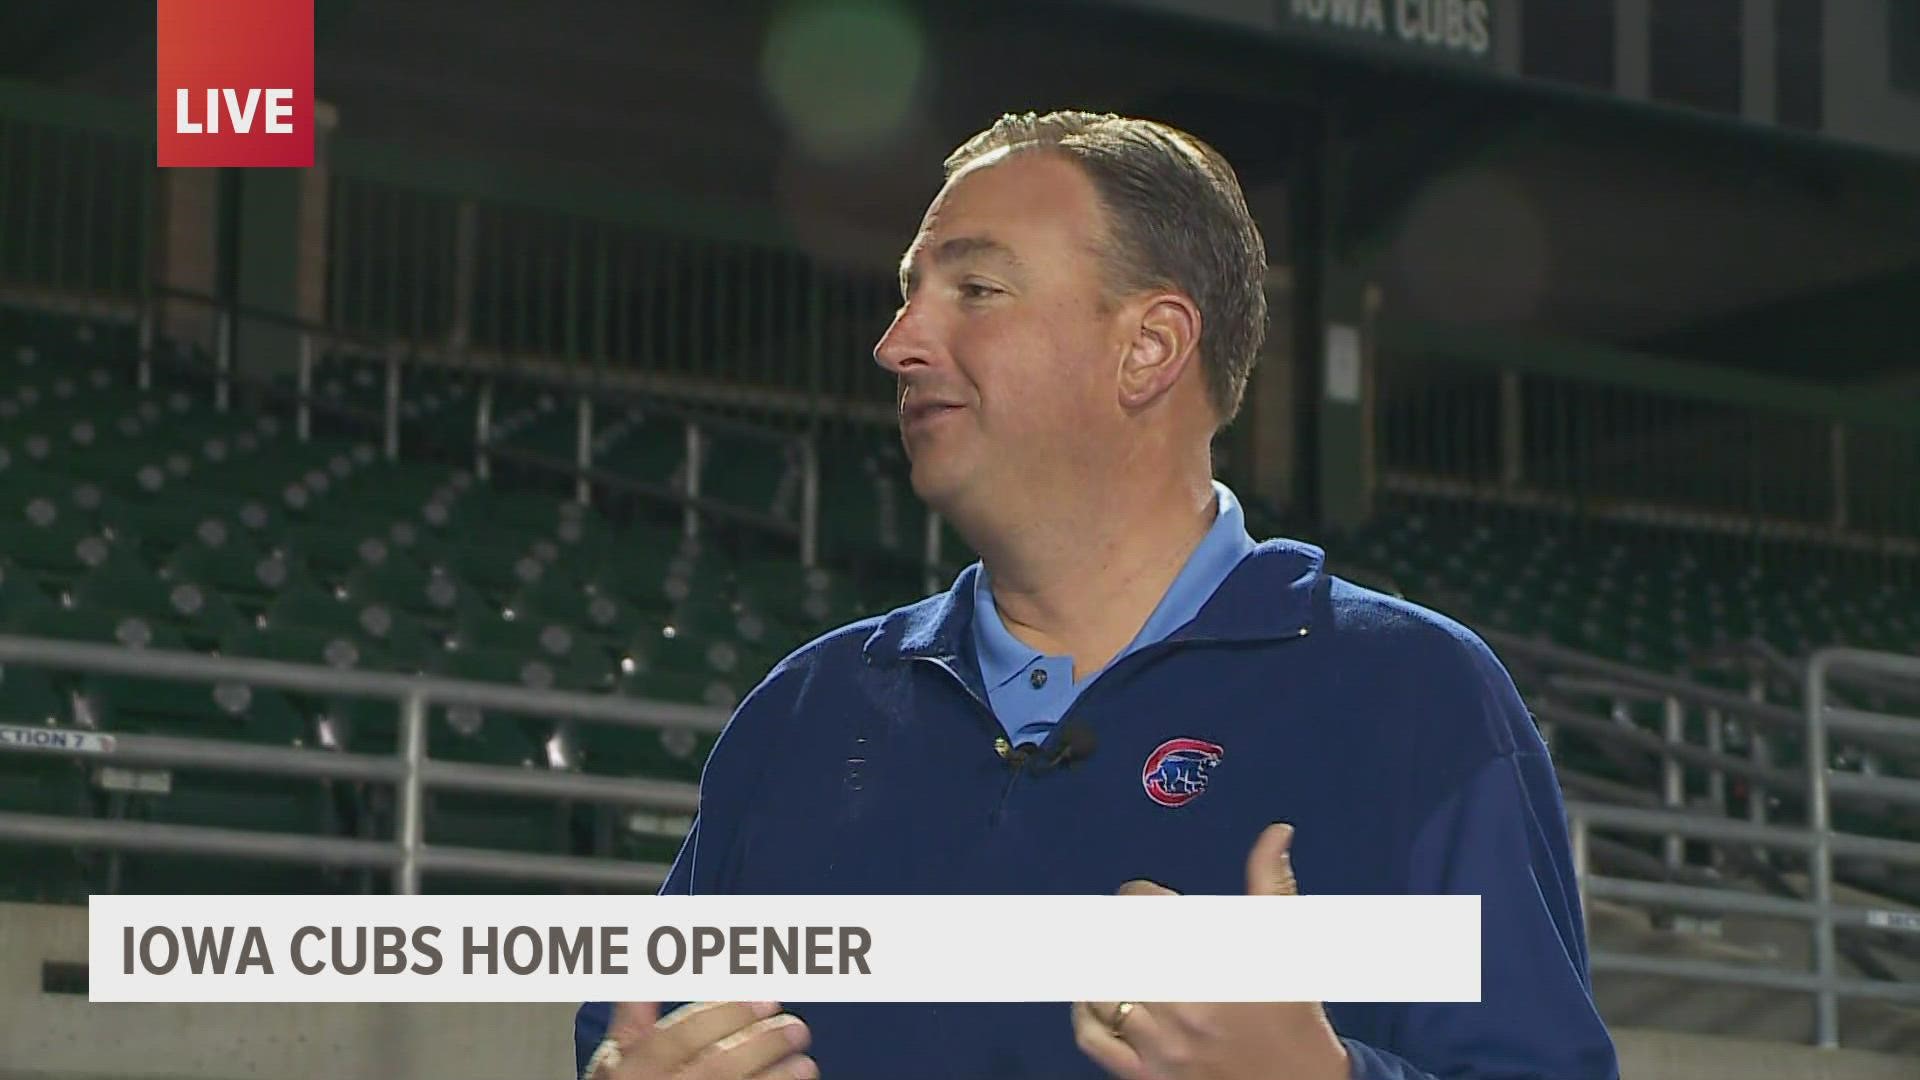 Opening Day: What to expect at Iowa Cubs home games this season